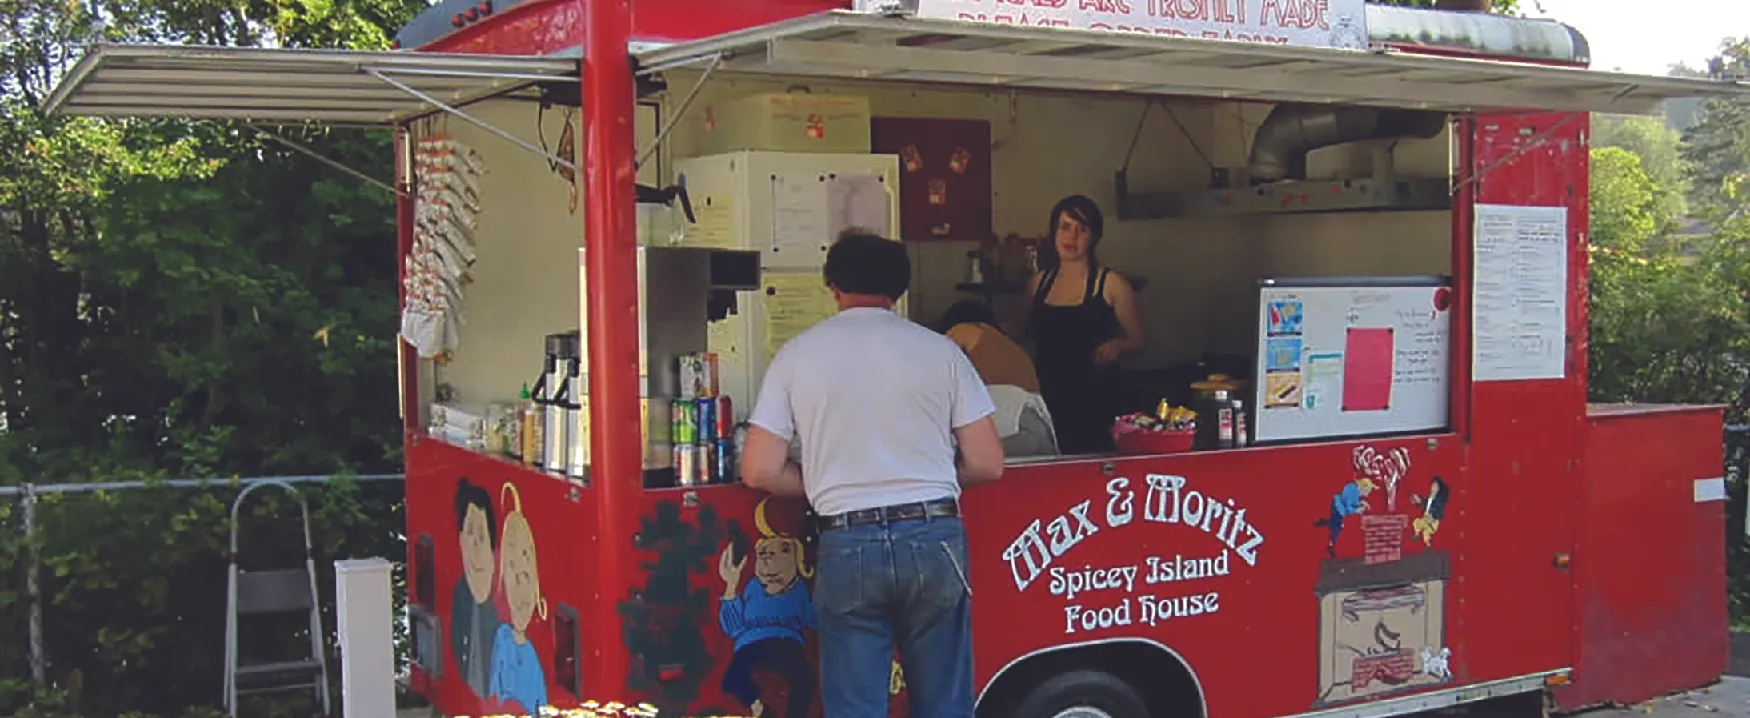 Picture of two people in a food truck serving a customer.